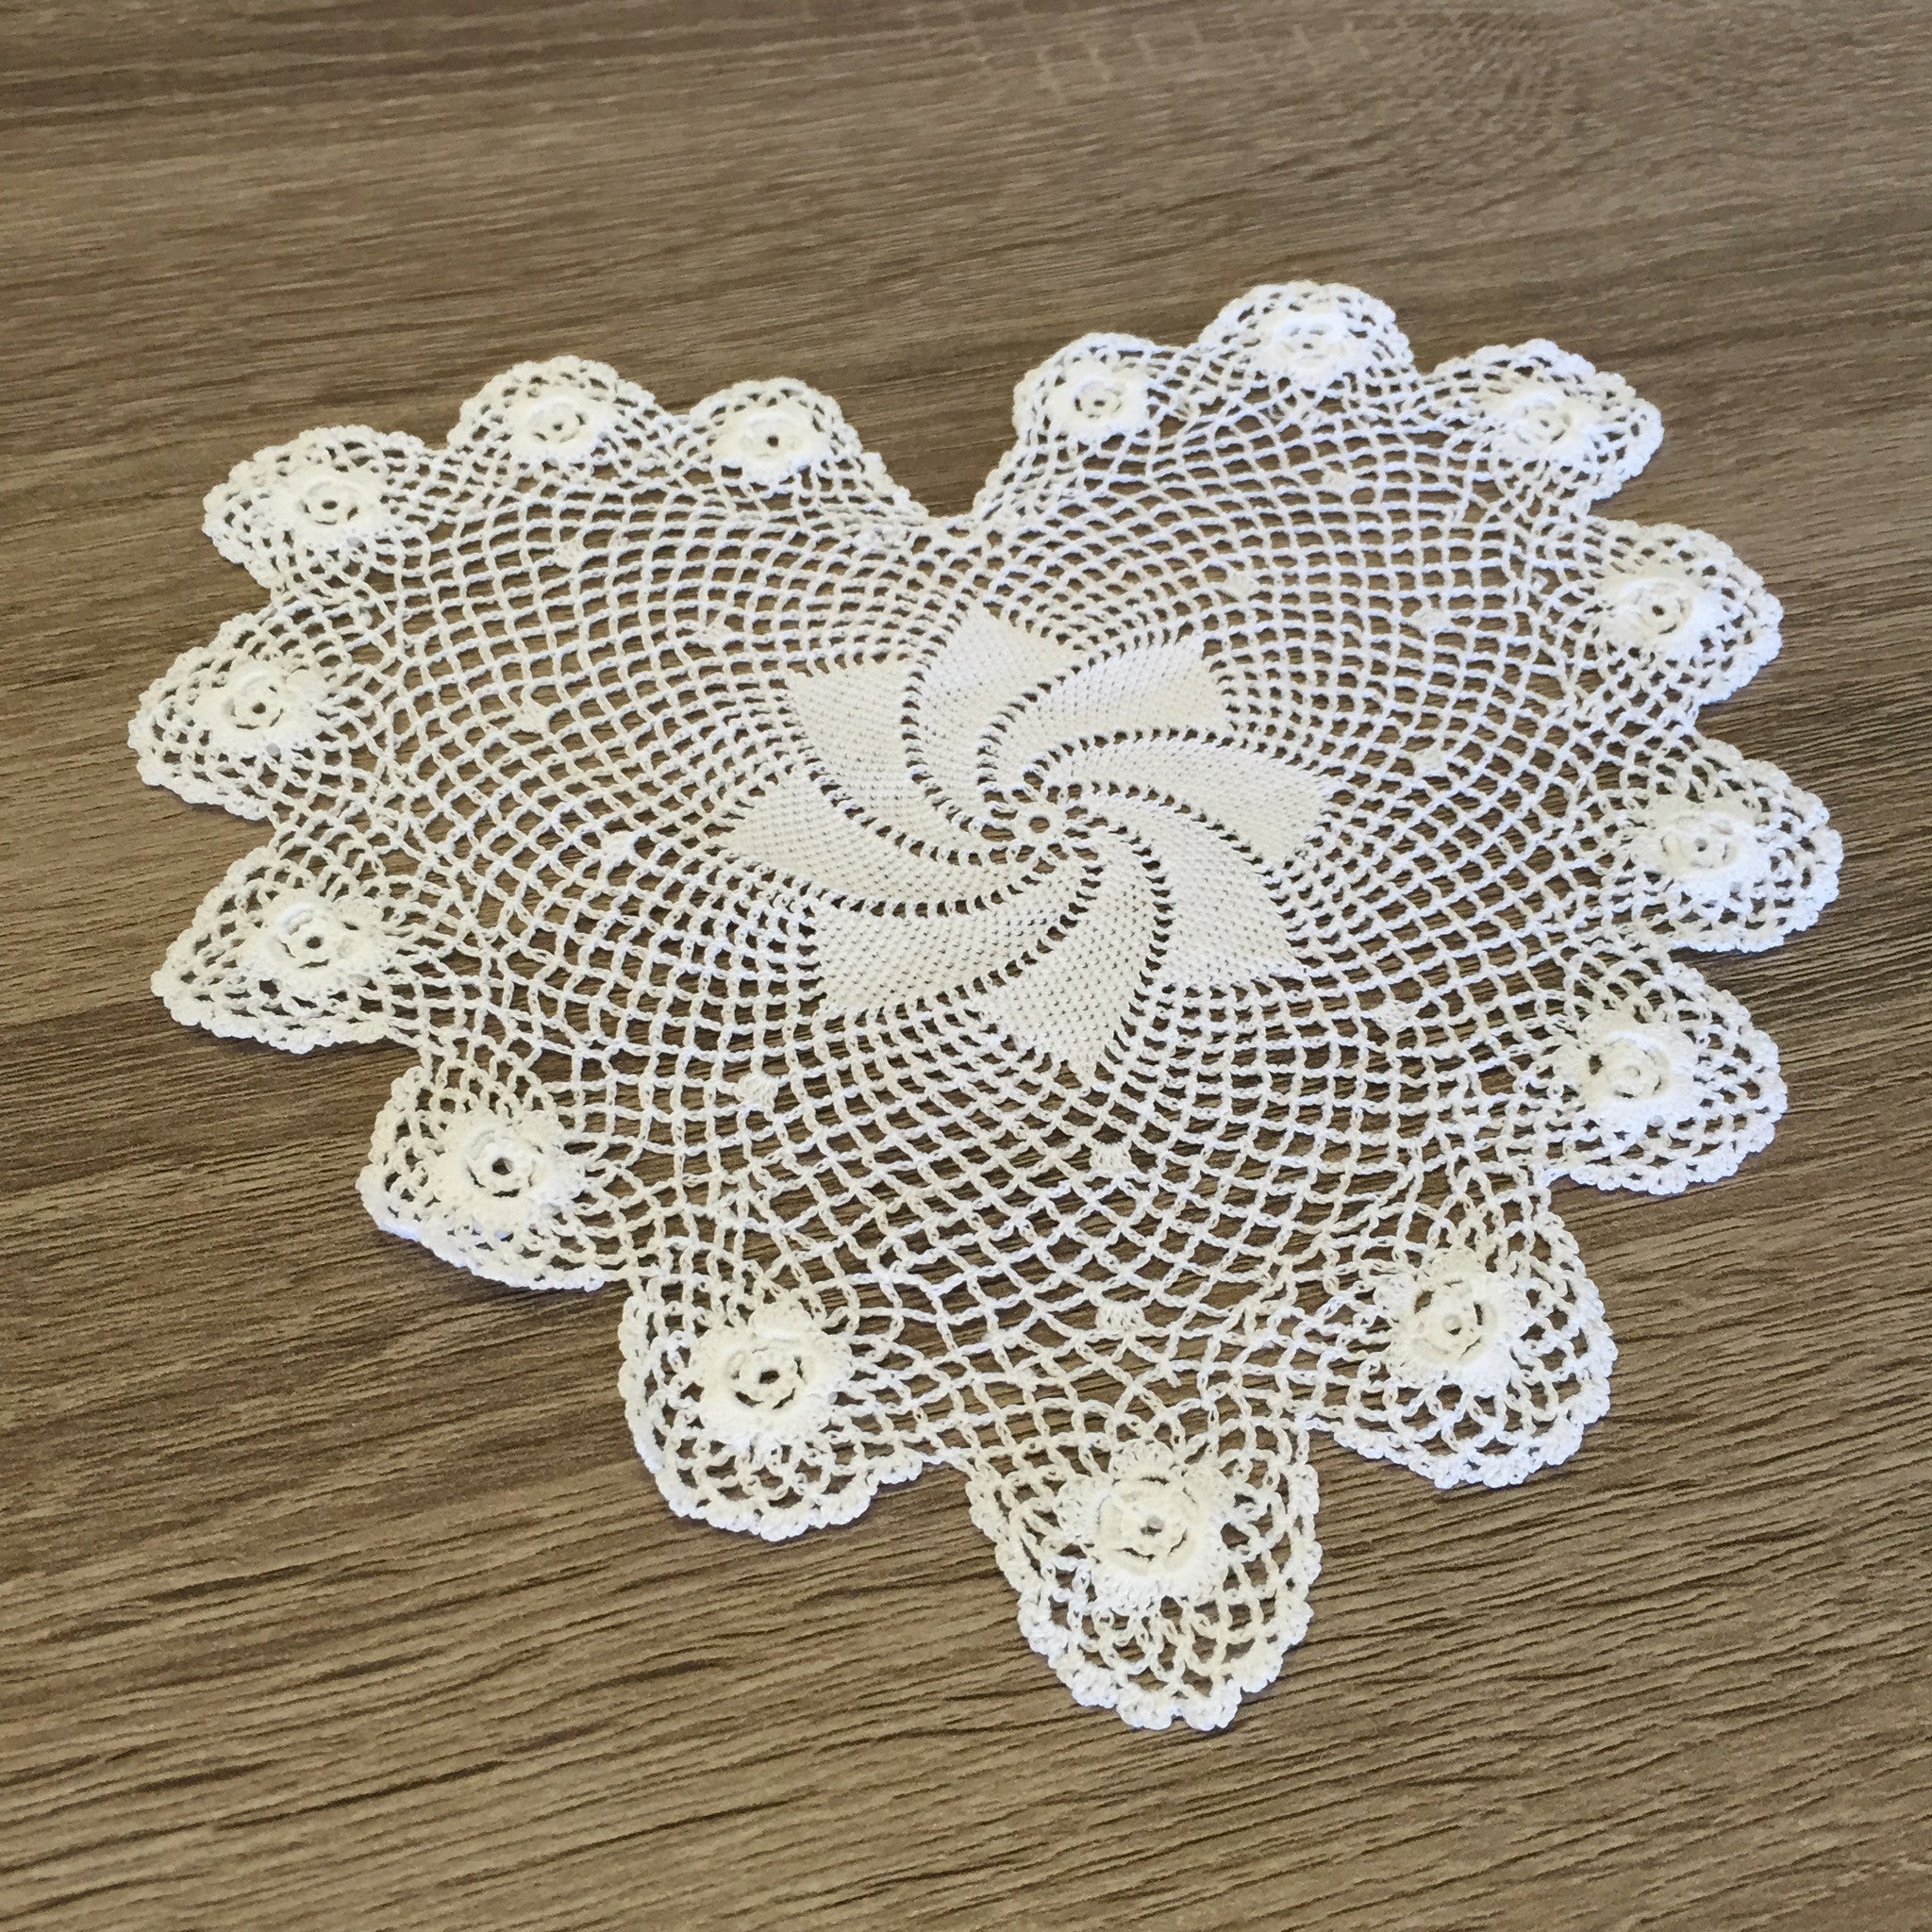 Plum Rose Heart Shaped Doilies White 6" Inch Set of 12